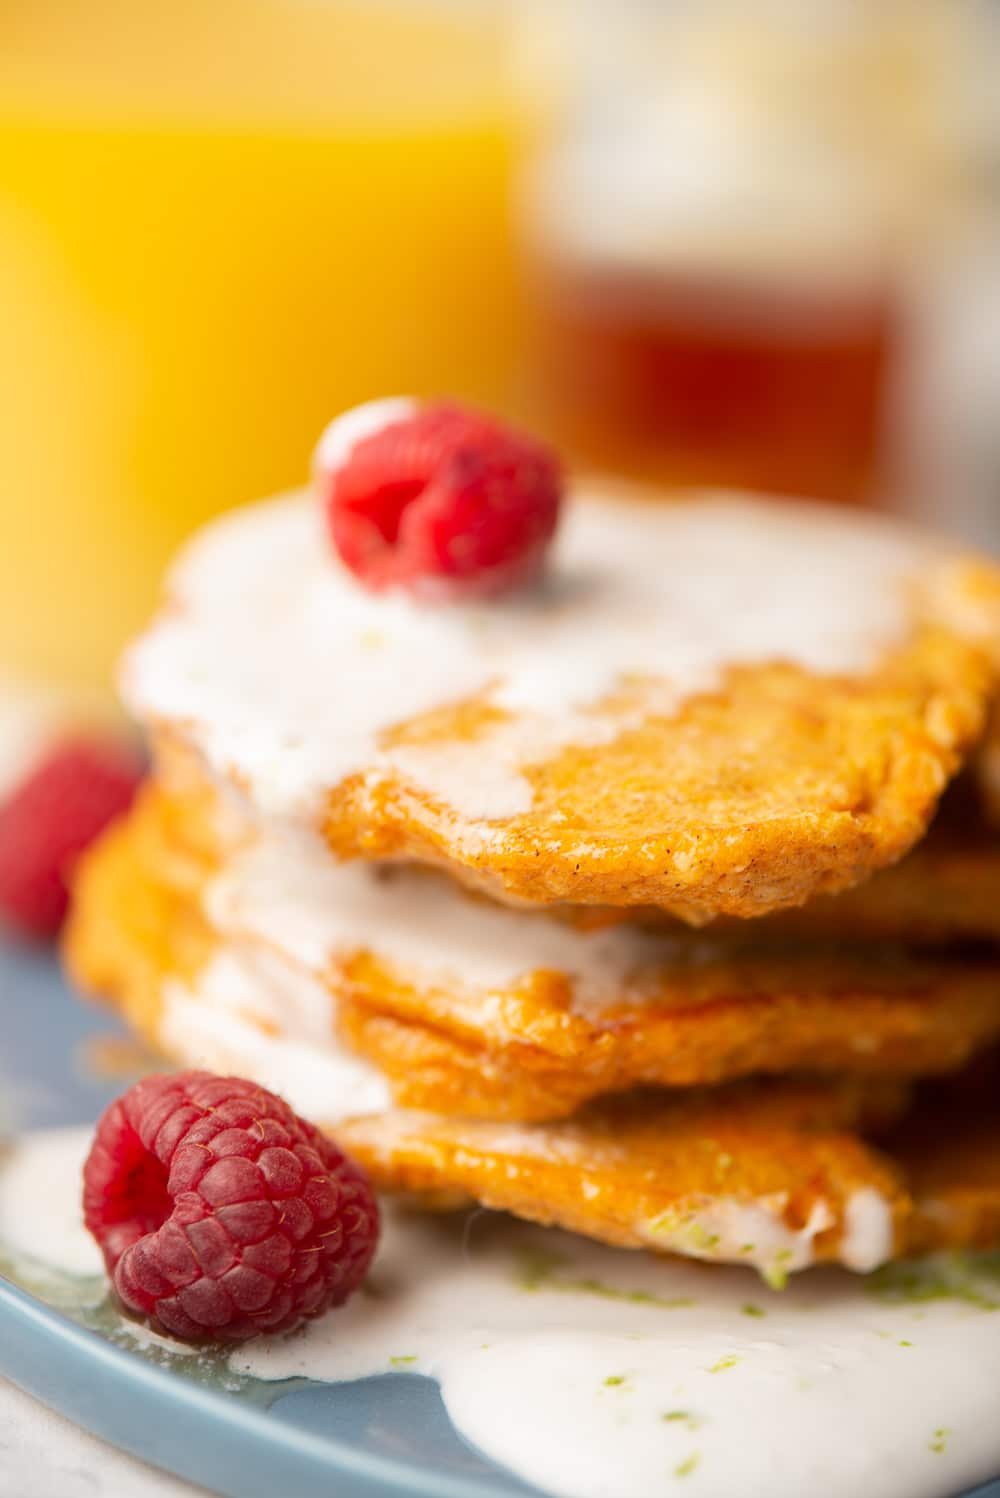 A close-up of a stack of fluffy sweet potato pancakes that have been topped with a lime-infused coconut cream and raspberries. The background has been blurred out.